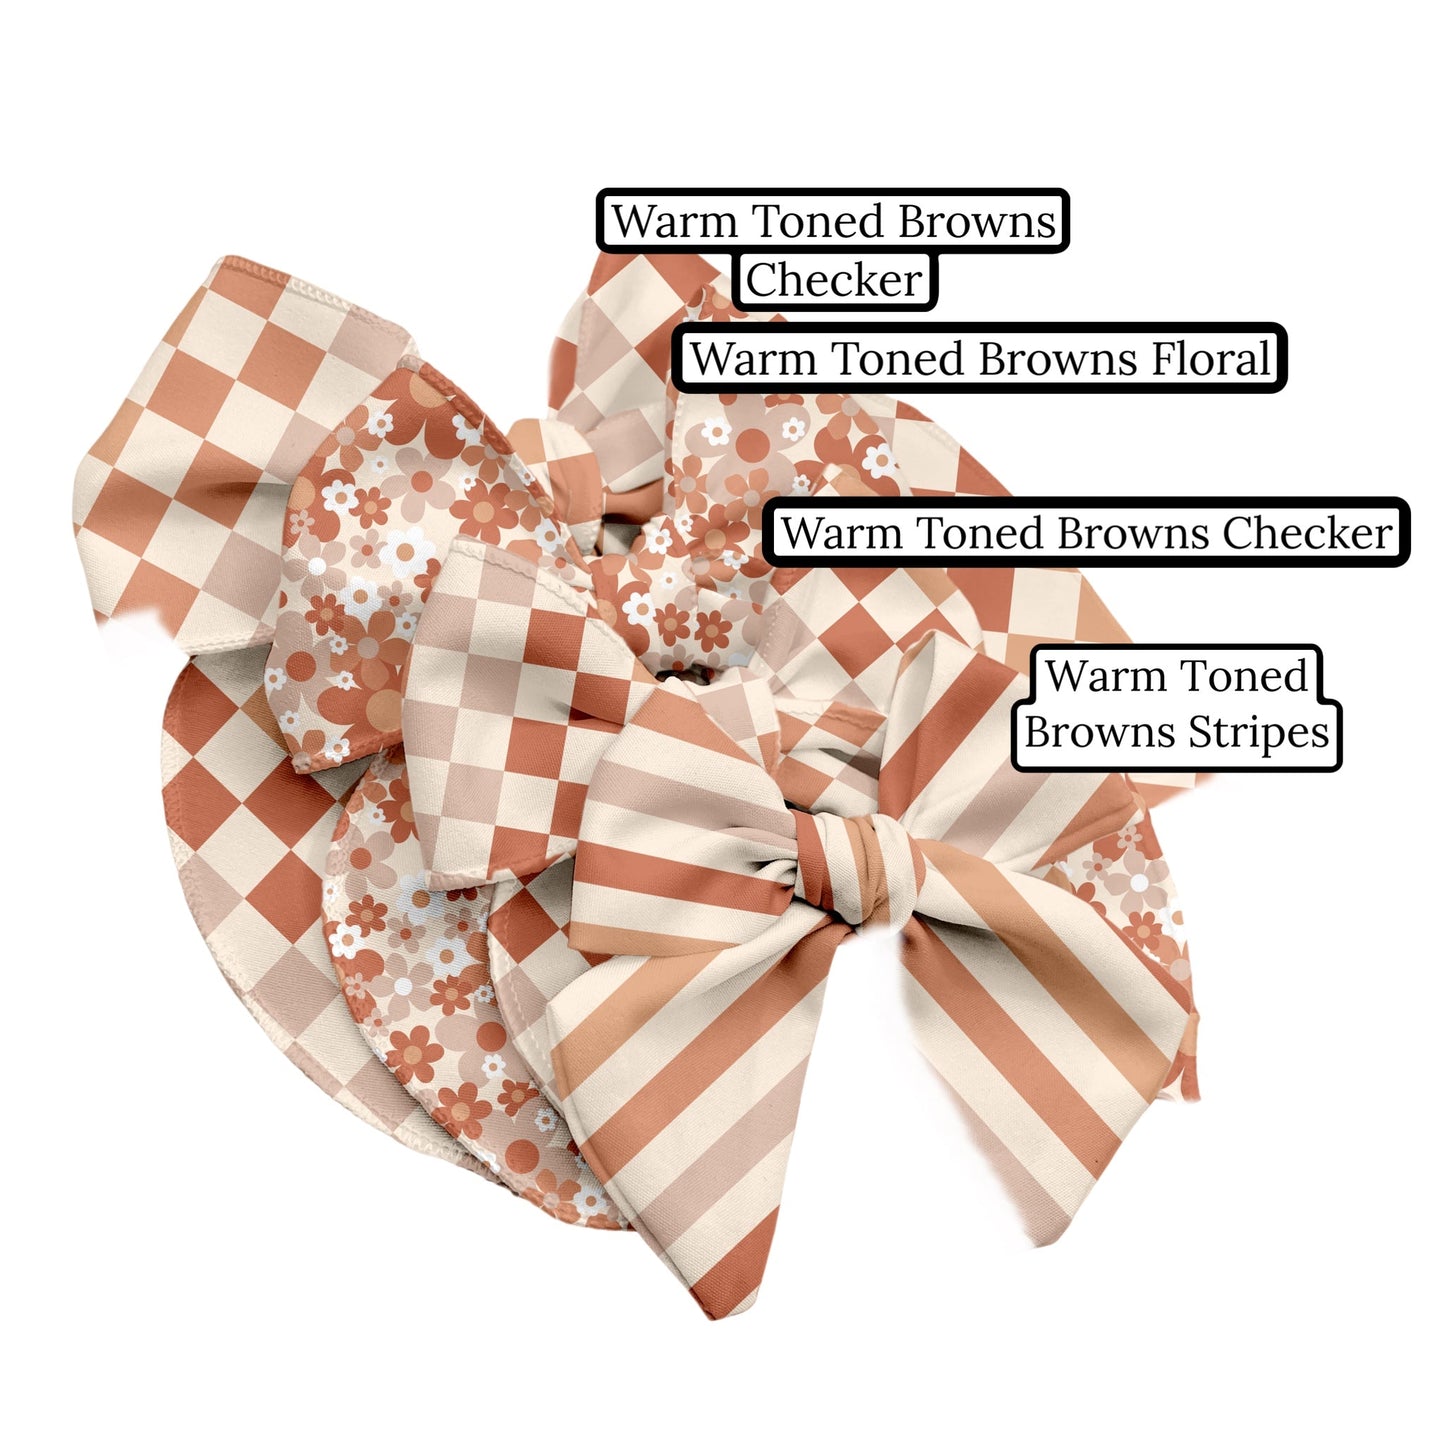 Warm Toned Browns Floral Hair Bow Strips